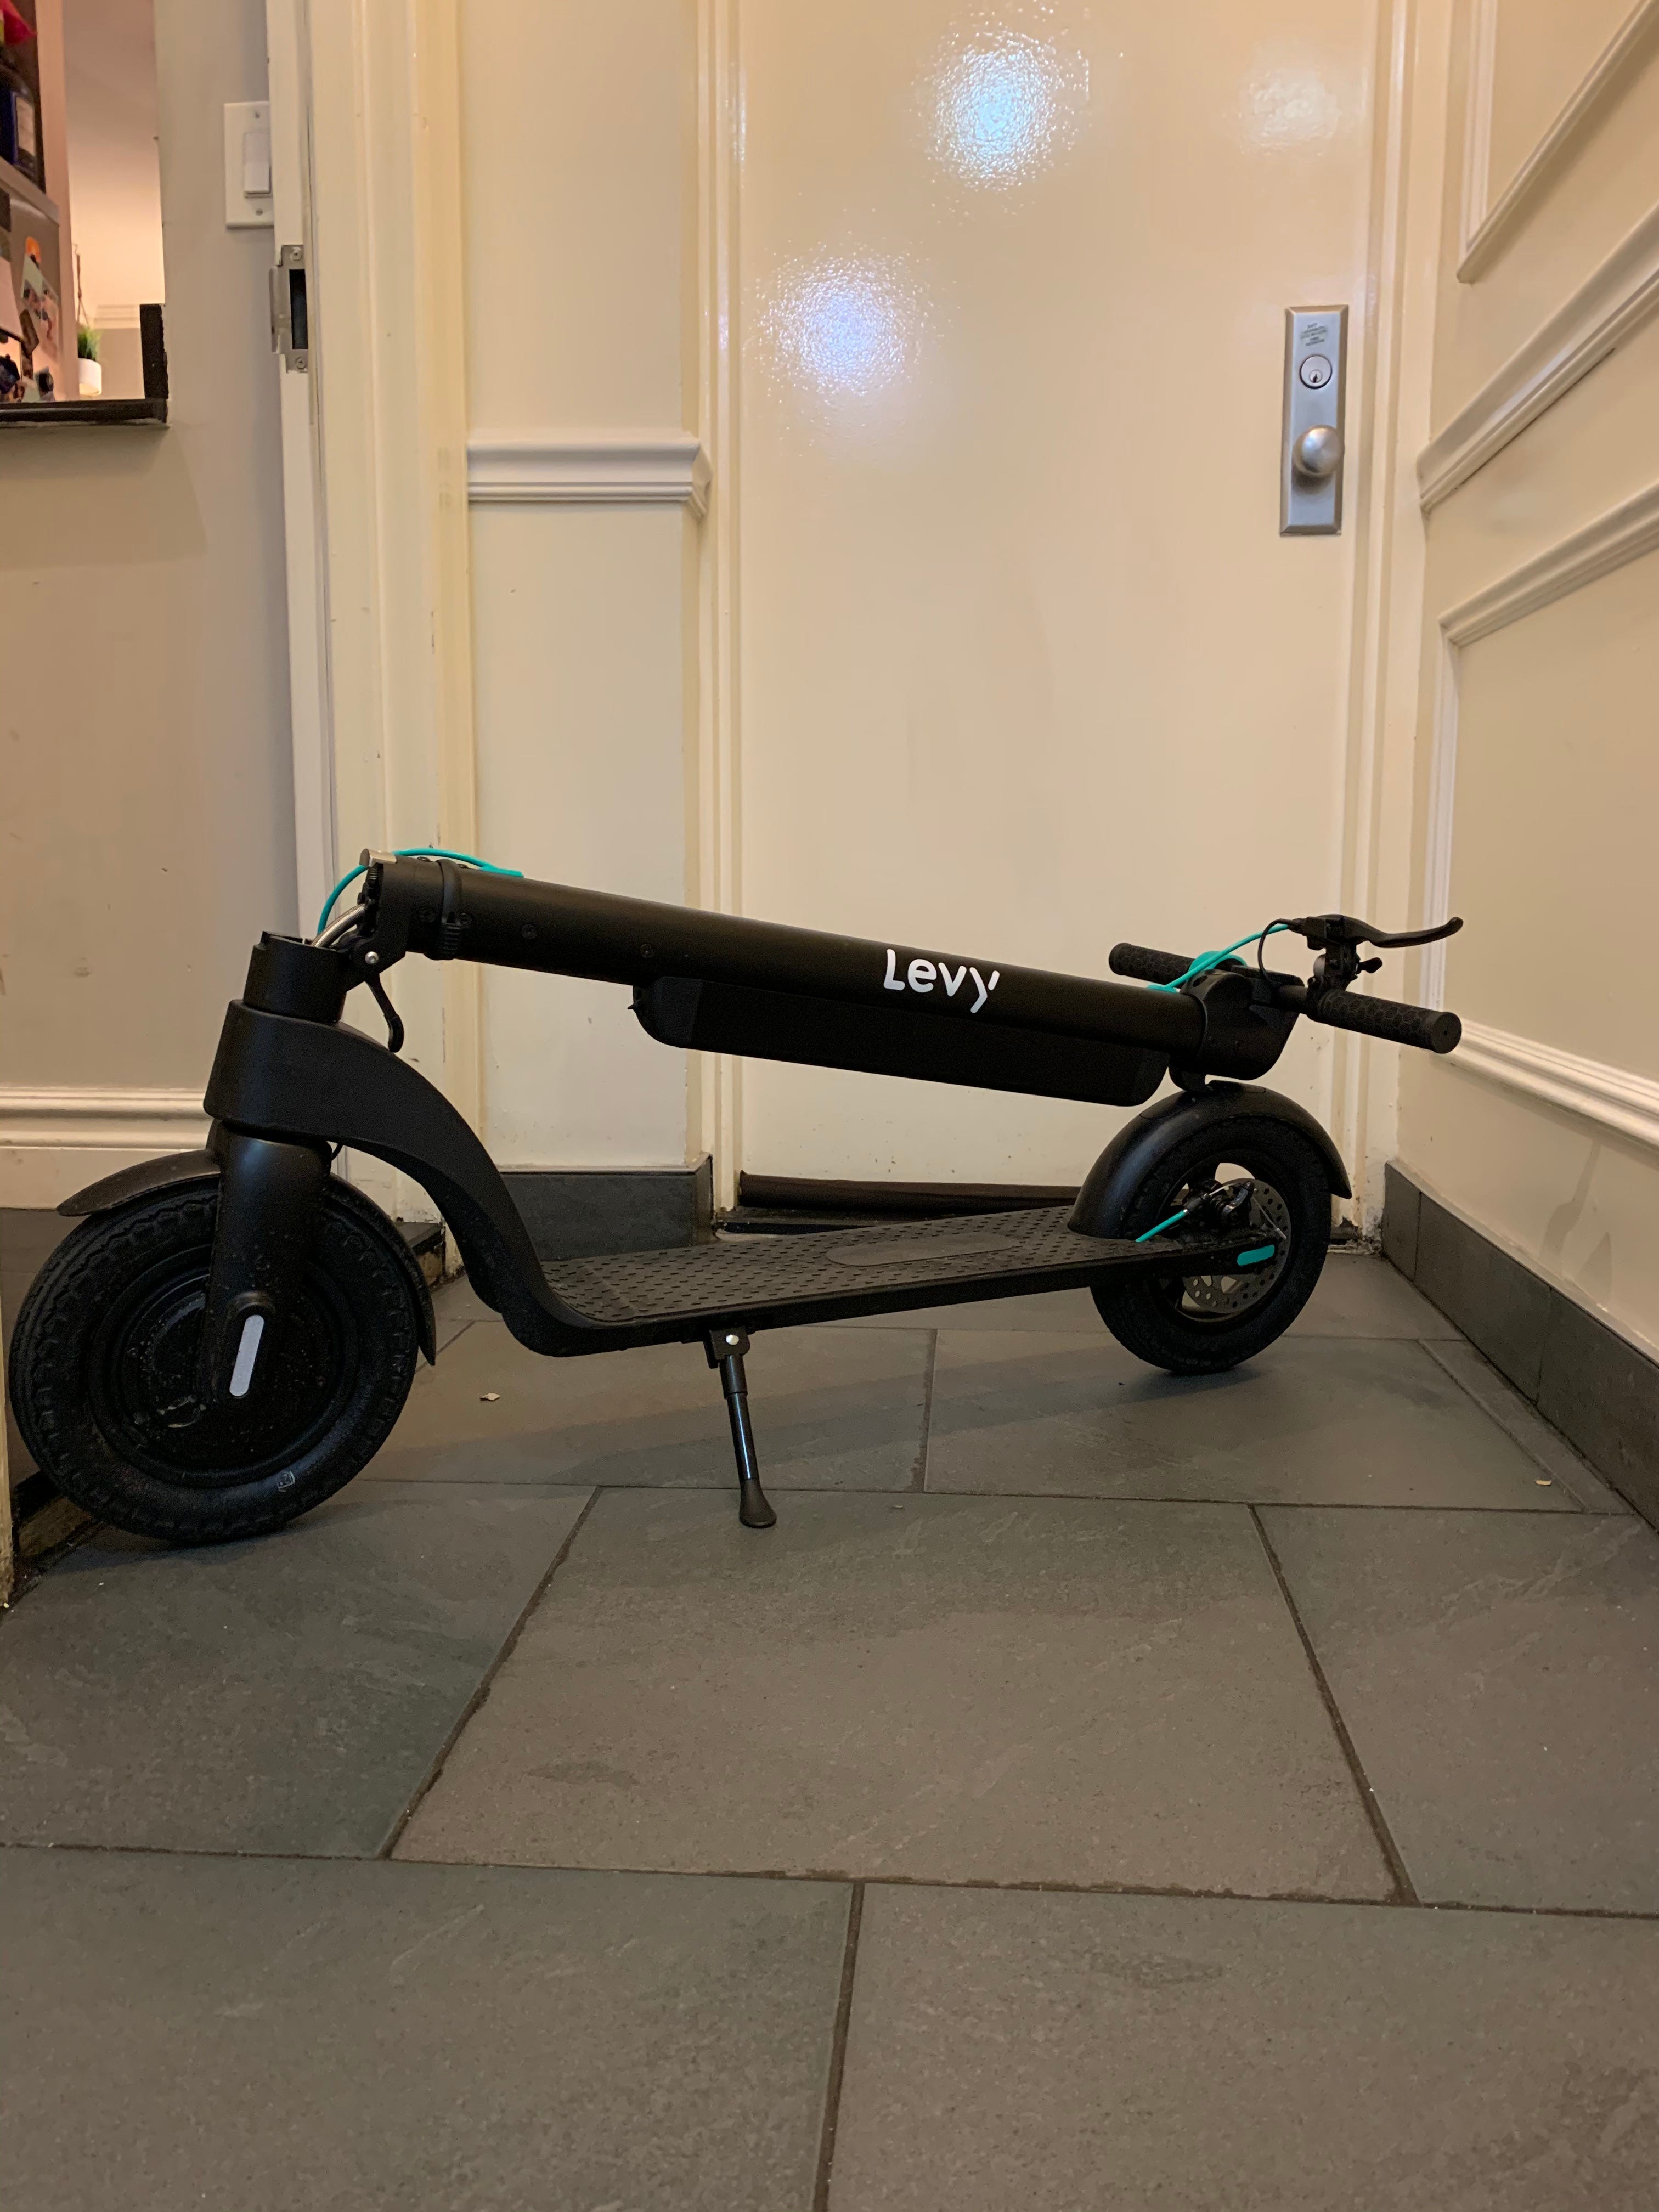 My review of most popular electric scooter brands(2020 edition) by Taylor Ryan | Medium